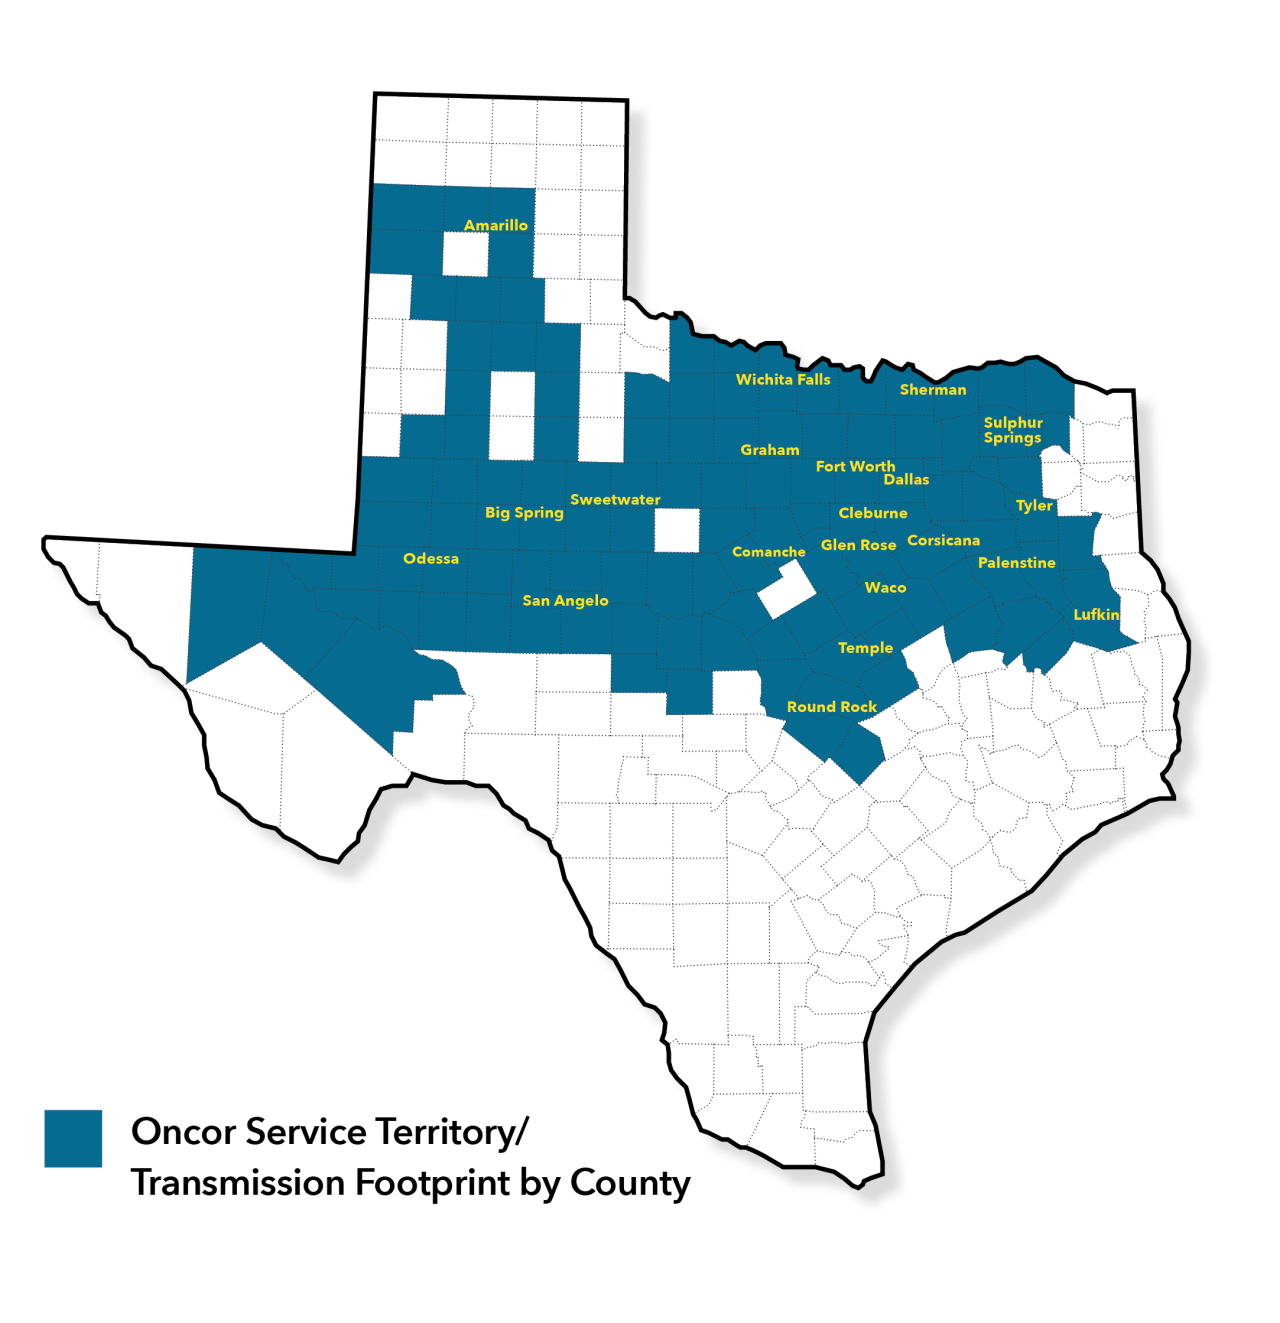 From the heart of north central Texas to the western edge of the state, Oncor delivers reliable energy to diverse communities.